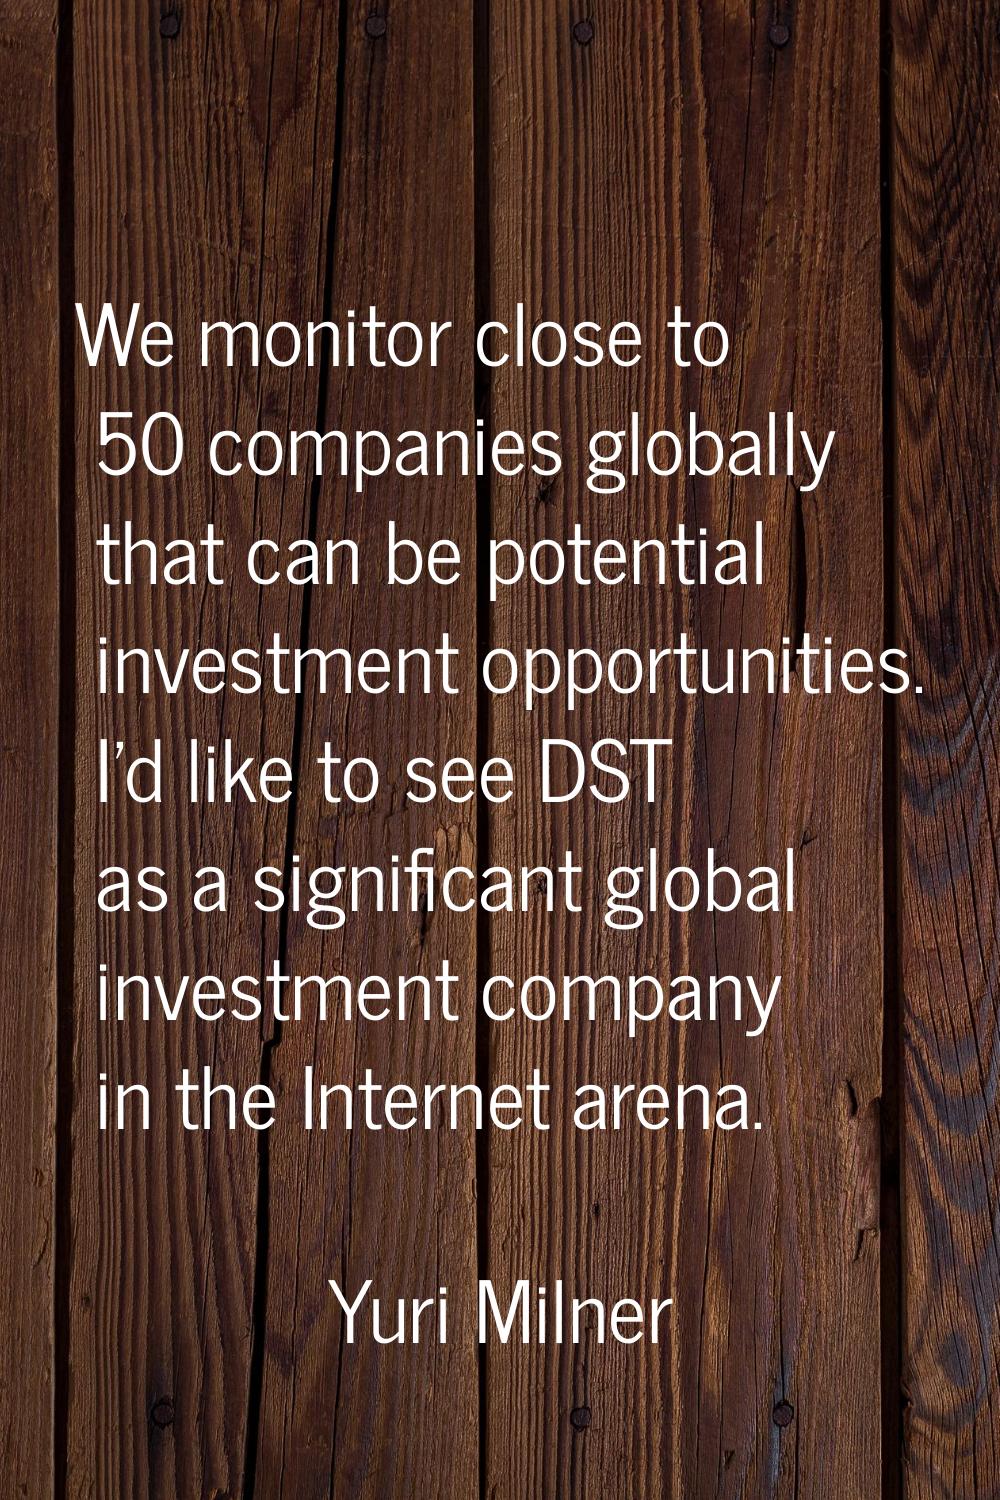 We monitor close to 50 companies globally that can be potential investment opportunities. I'd like 